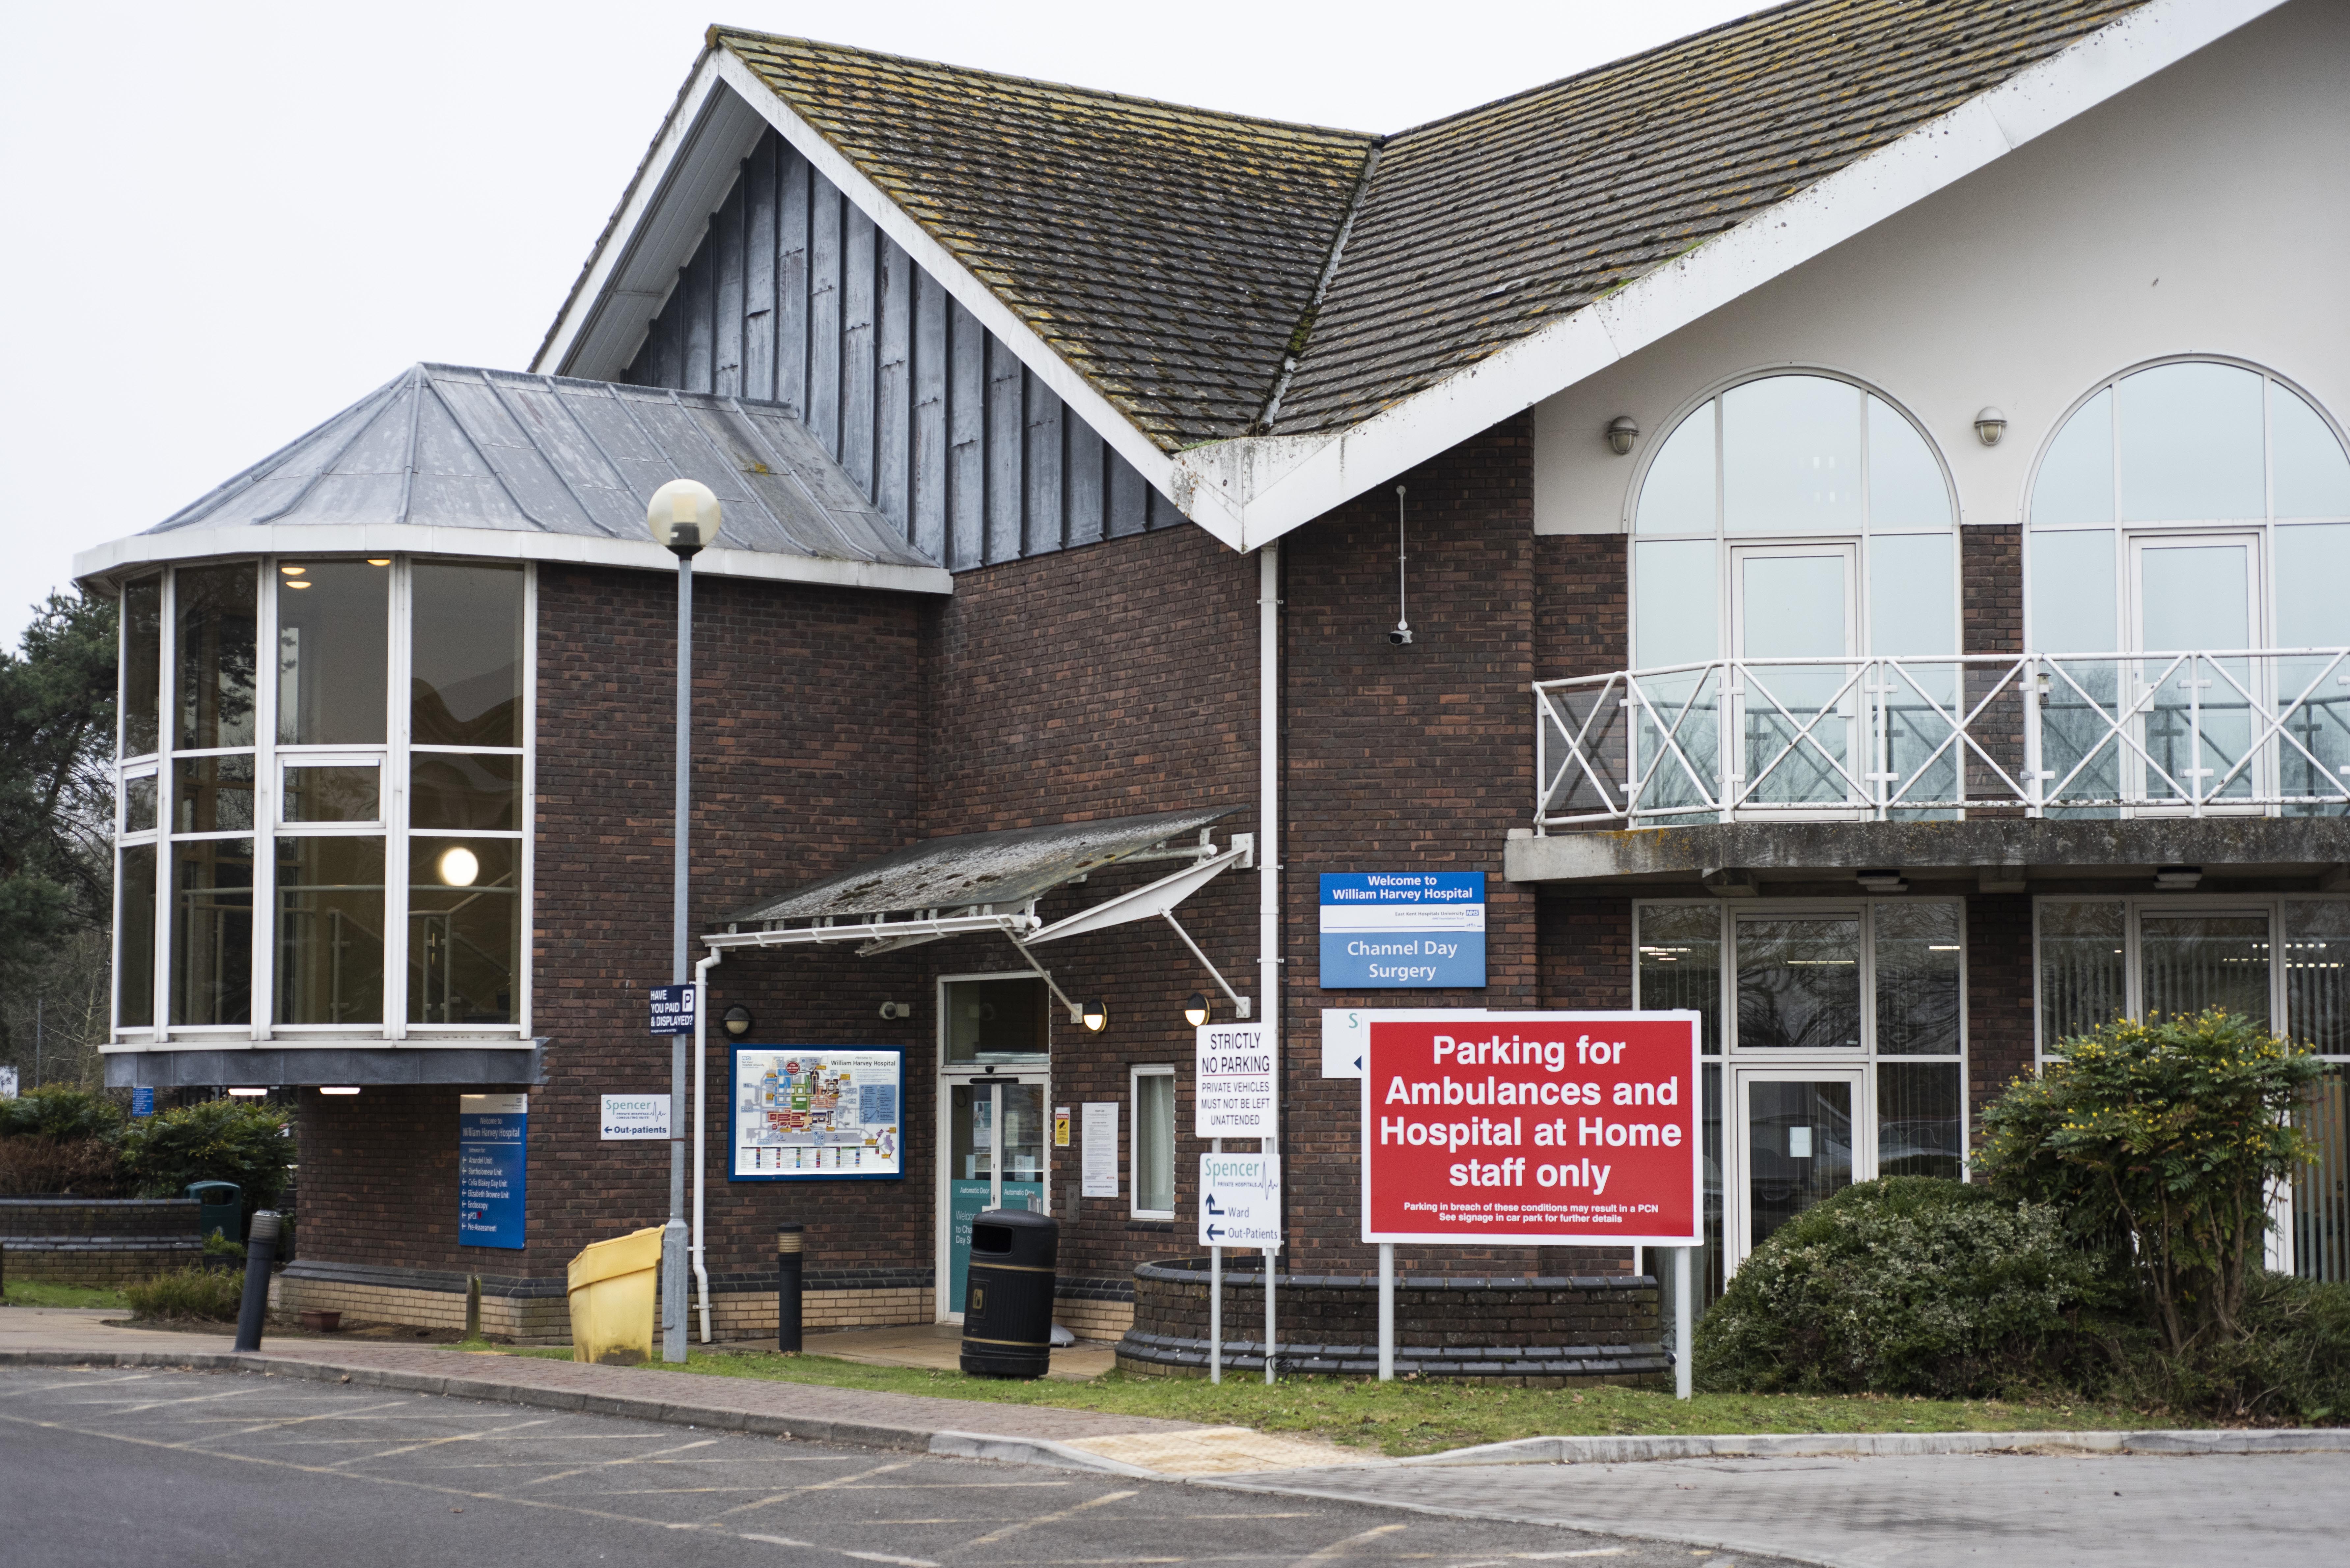 Photo showing entrance to Channel Day Surgery at William Harvey Hospital